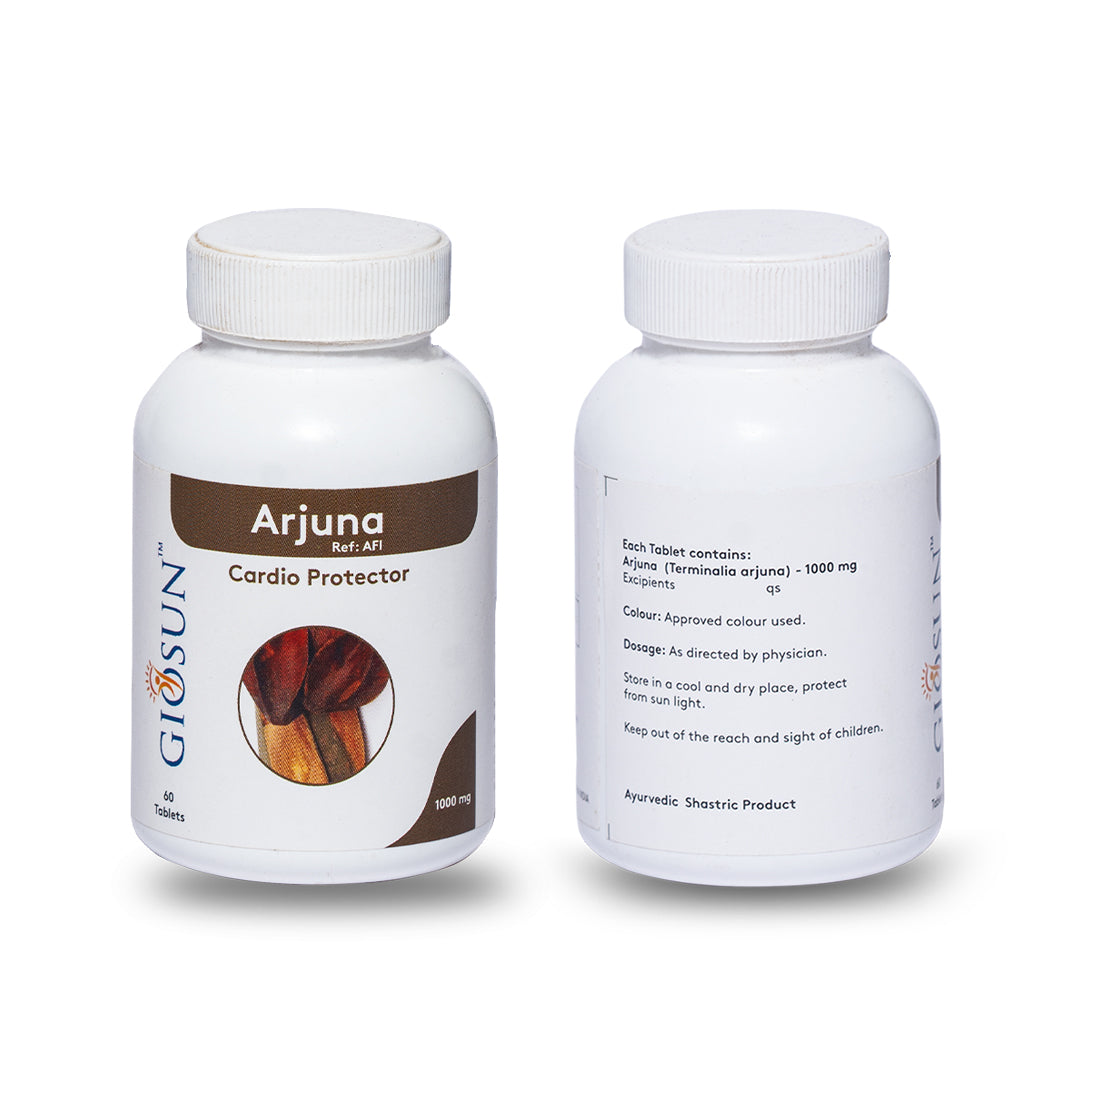 Arjuna Capsules - Helps to Promote Heart Health, Helps to Manage Cholesterol & Metabolism (60 Capsules - 500/1000mg)